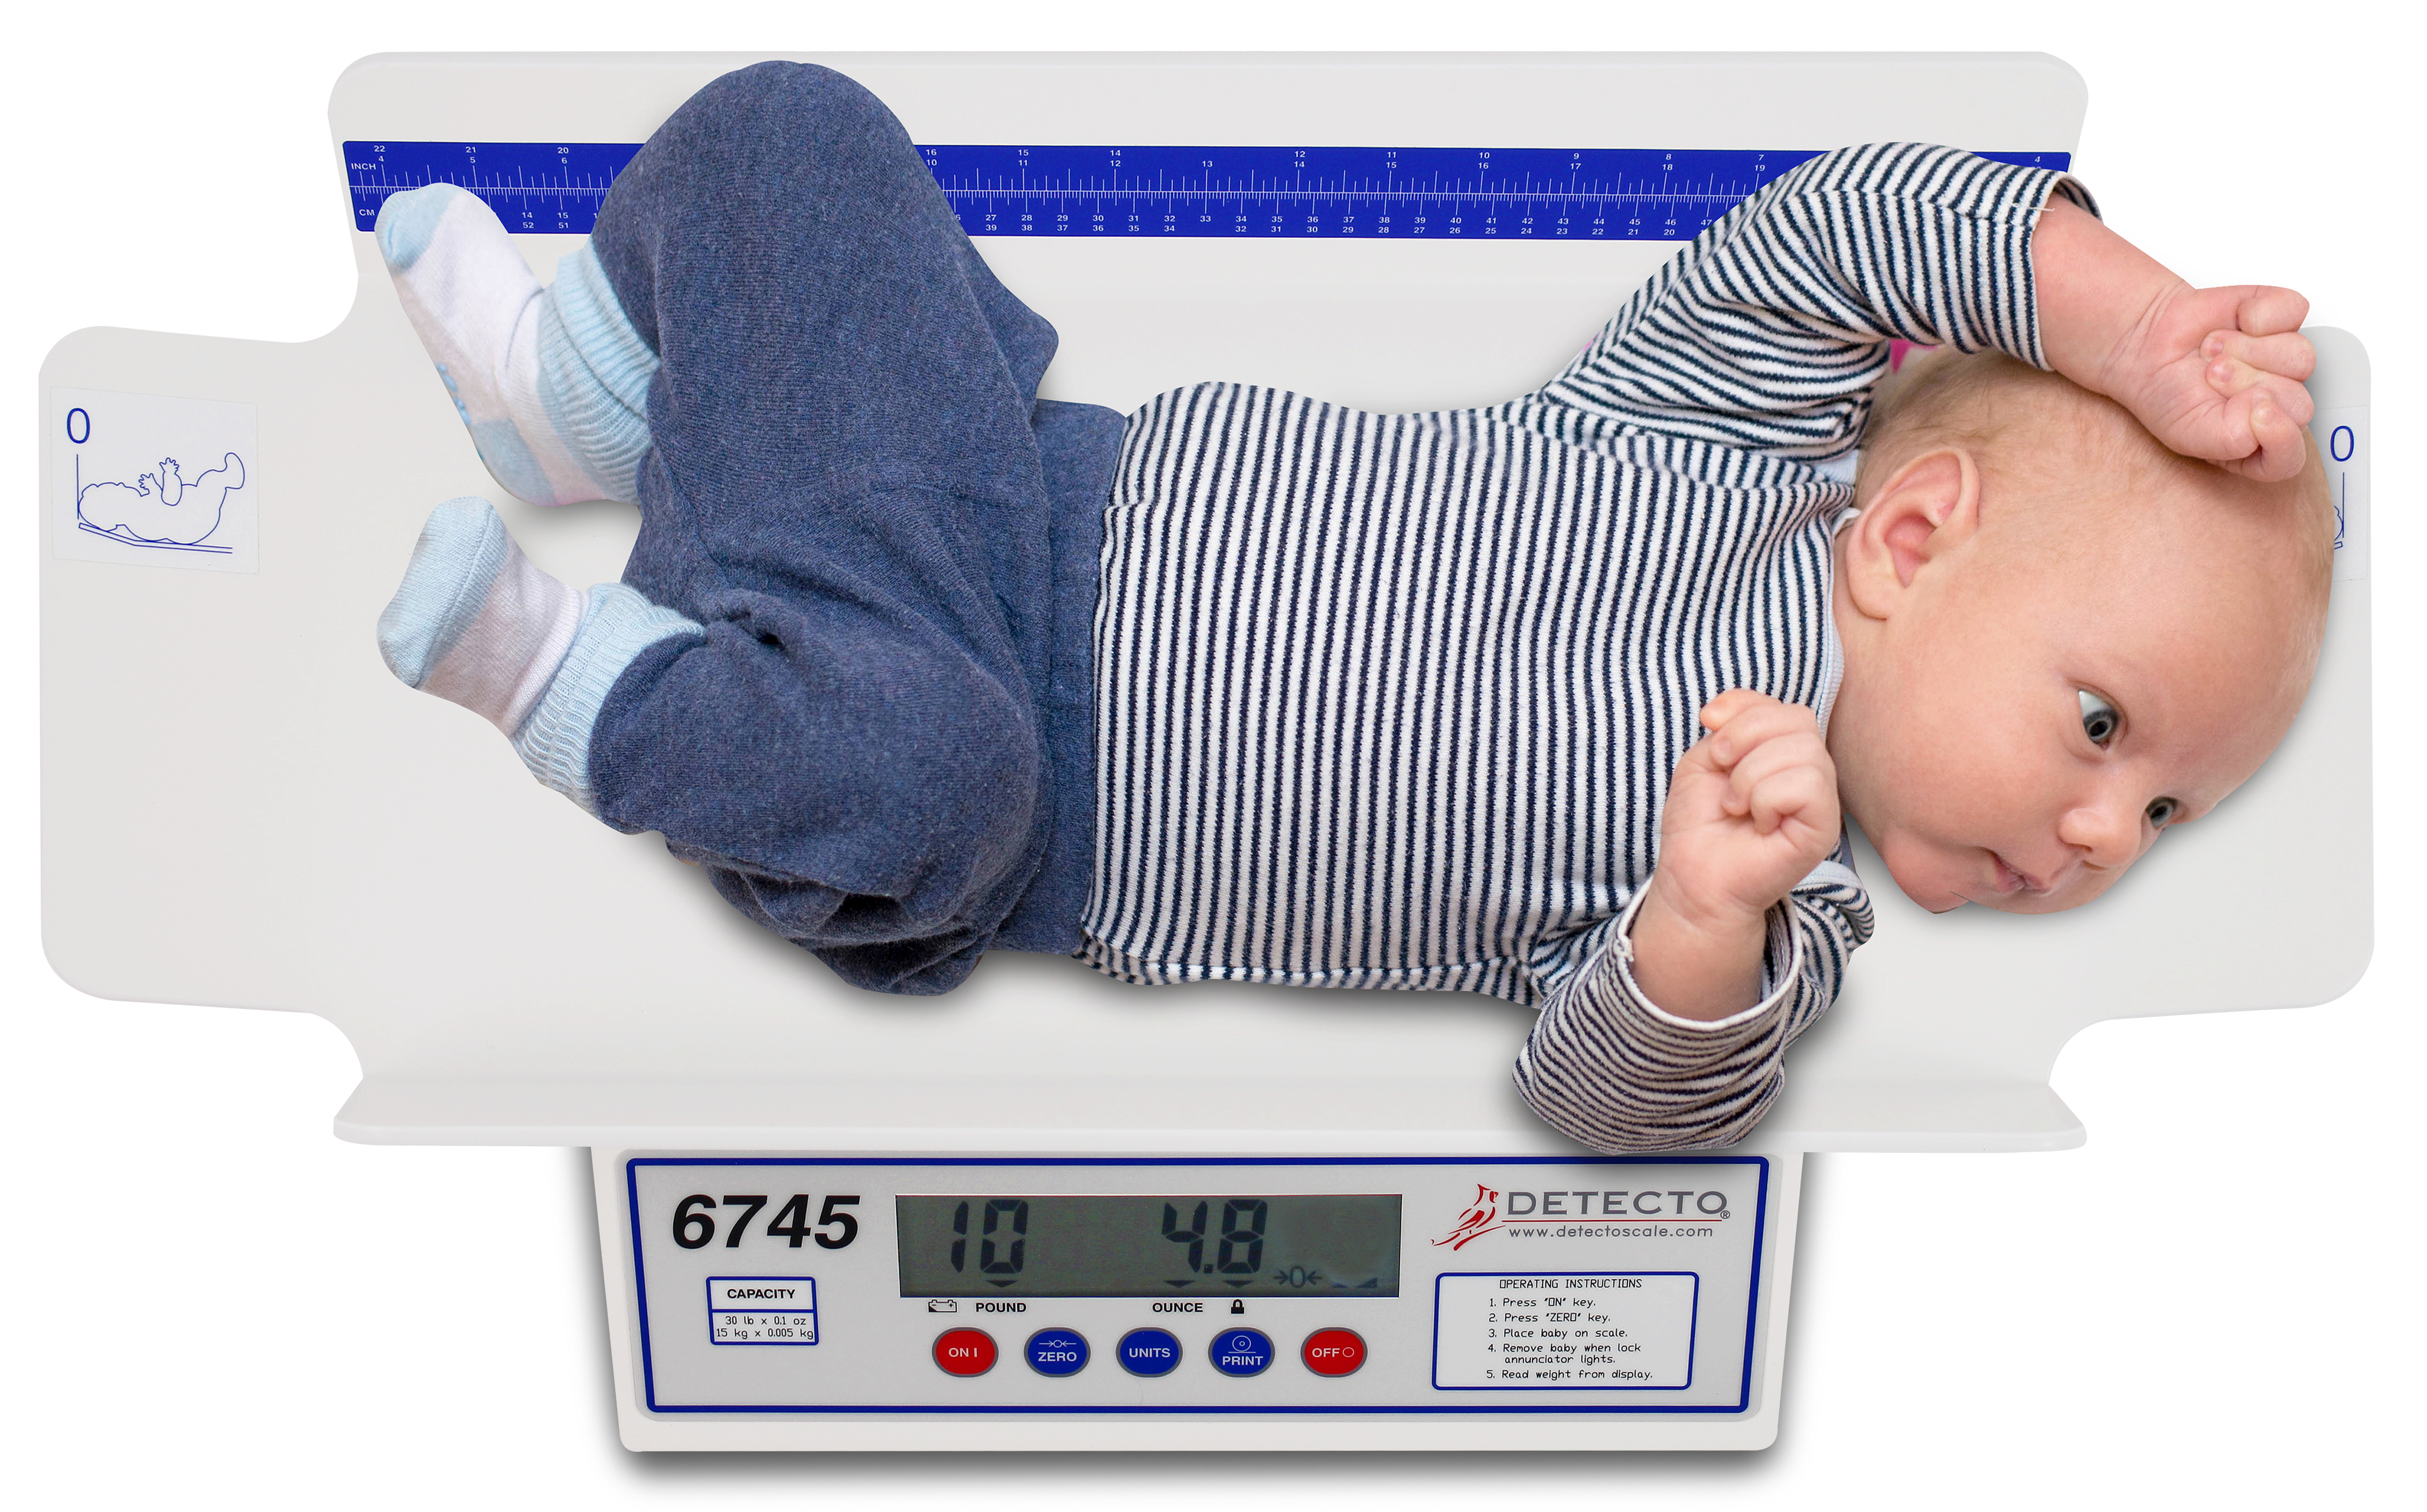 https://cardinalscale.com/themes/ee/site/default/asset/img/product/6745_Baby-Weighing-Overhead.jpg